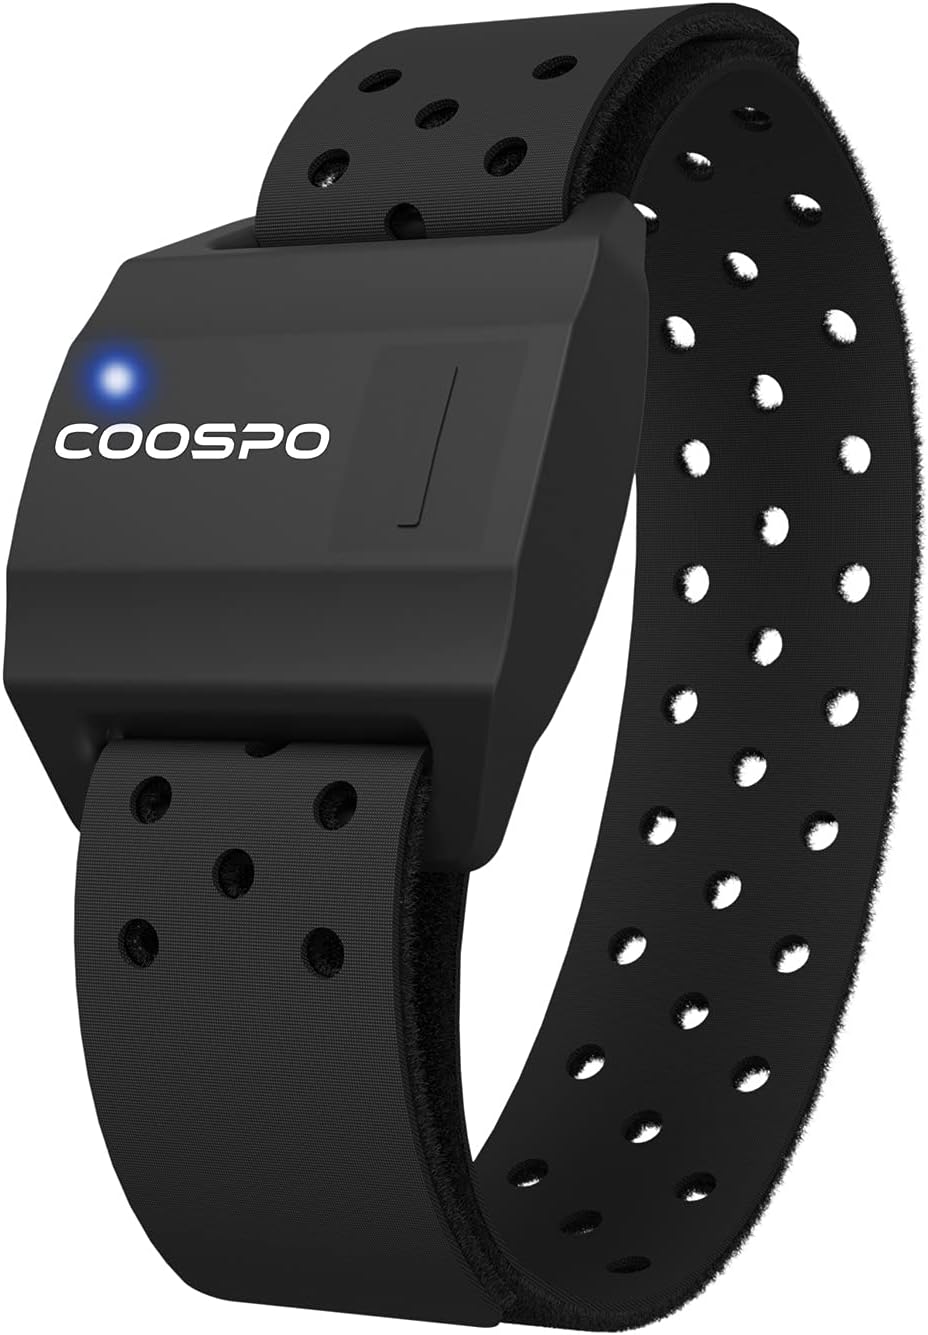 COOSPO Armband Heart Rate Monitor, Bluetooth ANT+ HR [...]